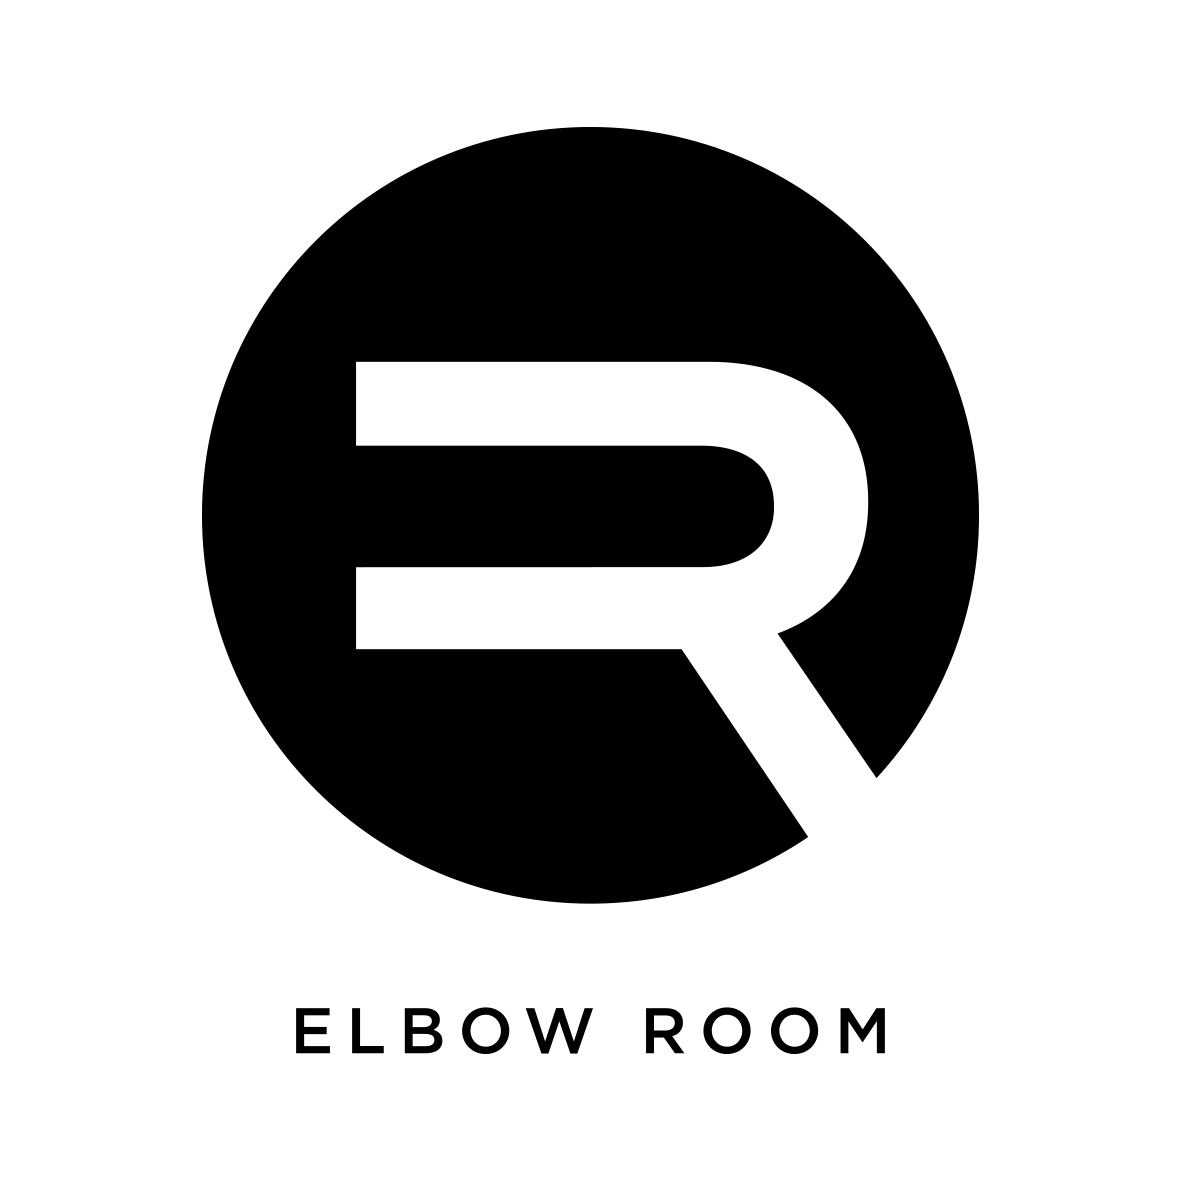 A black circle has a 'R' cut out in the middle. Under the circle is the text 'Elbow Room'